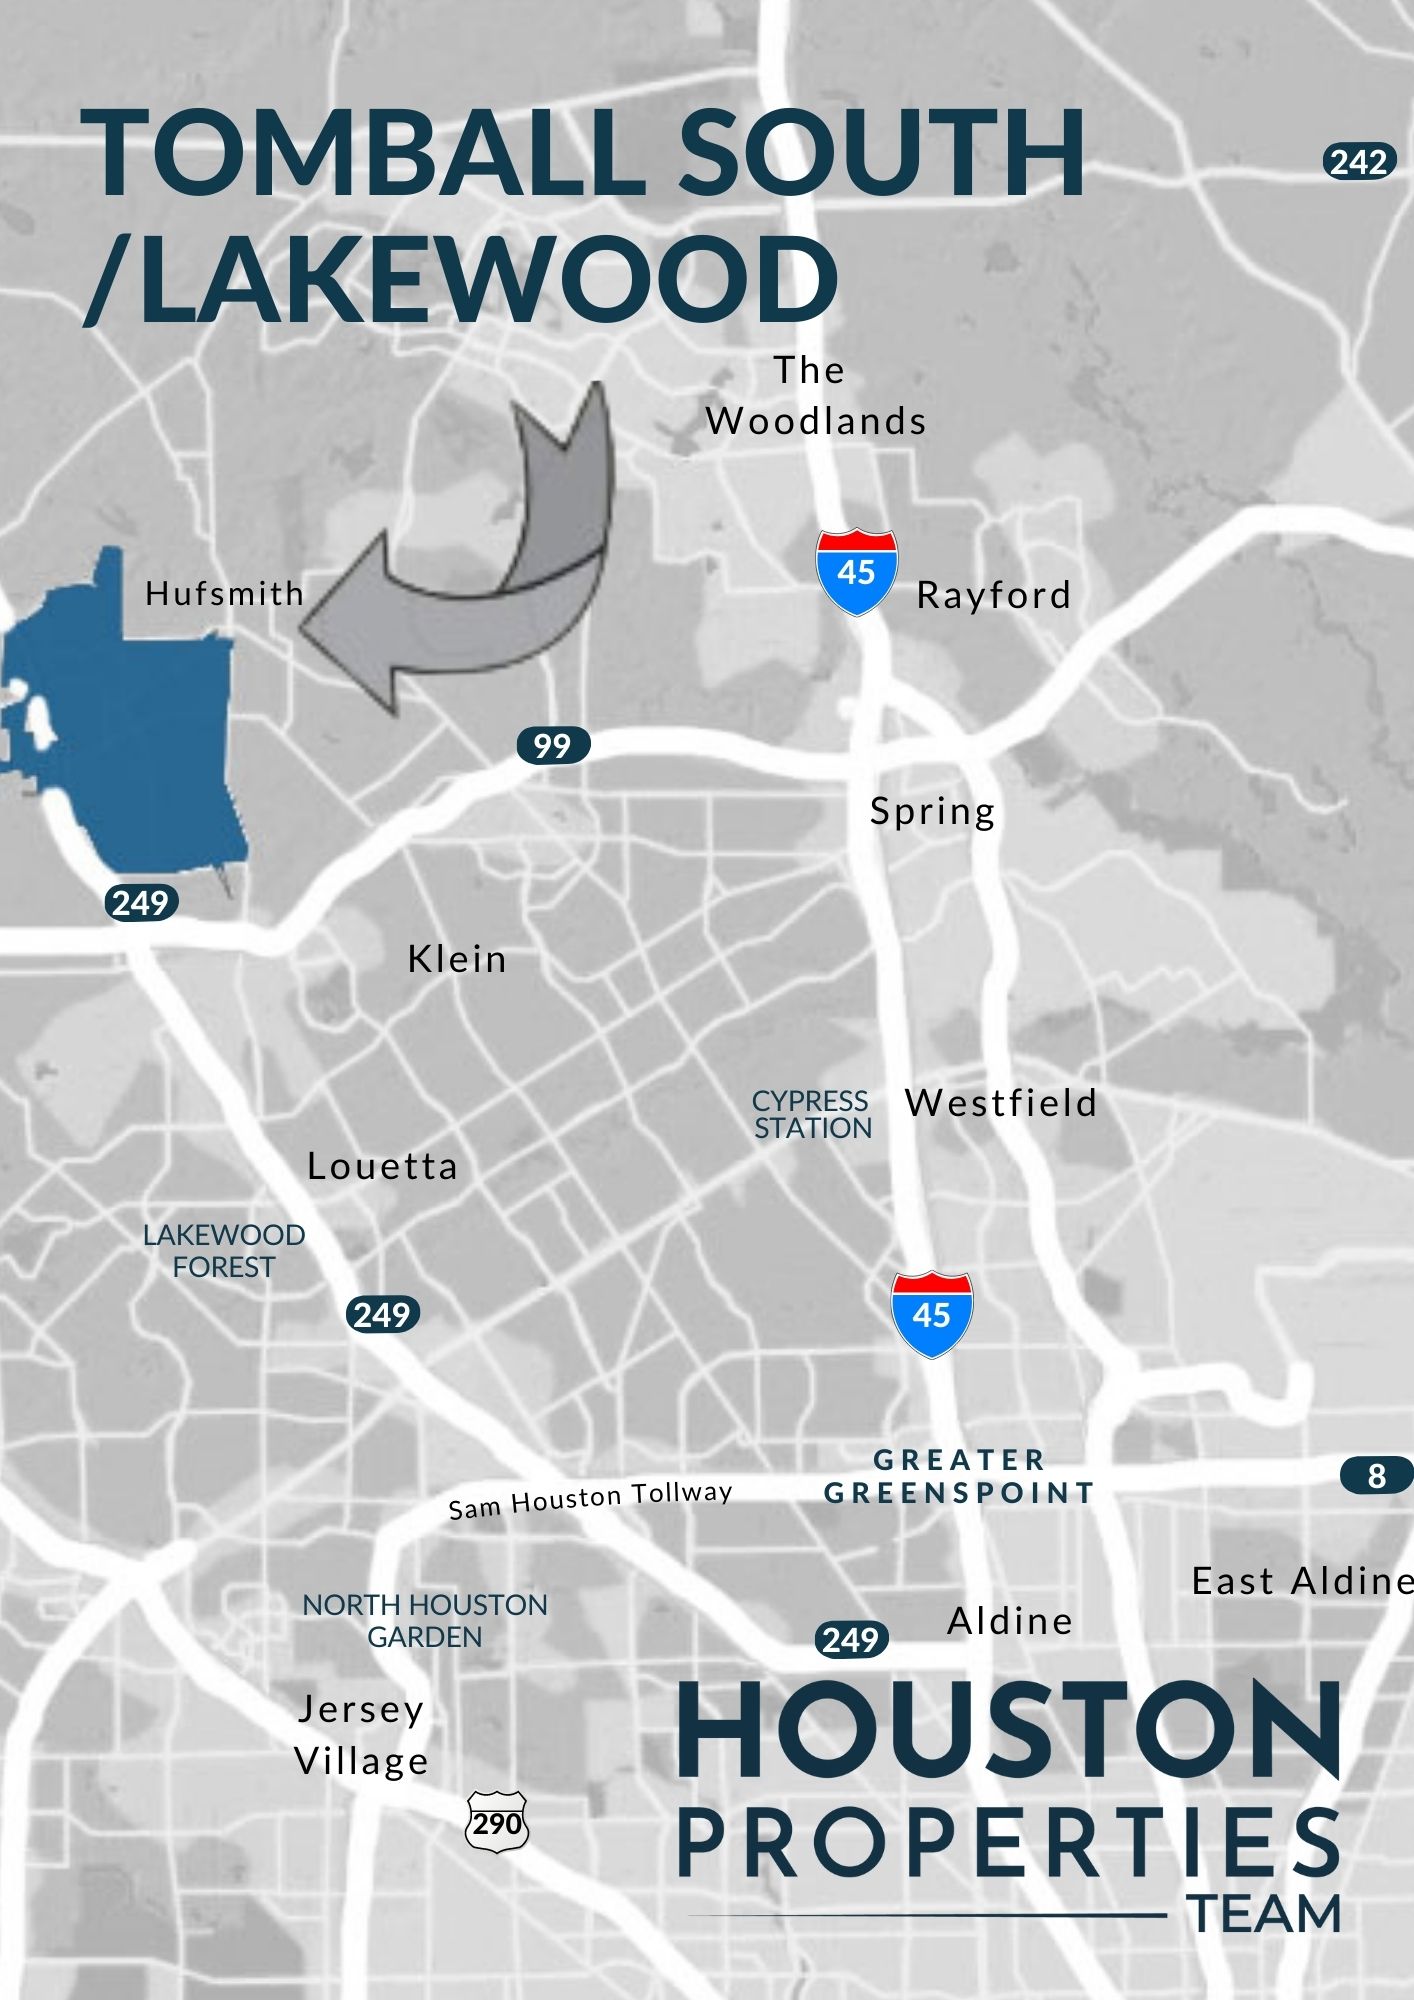 Tomball South/Lakewood Map